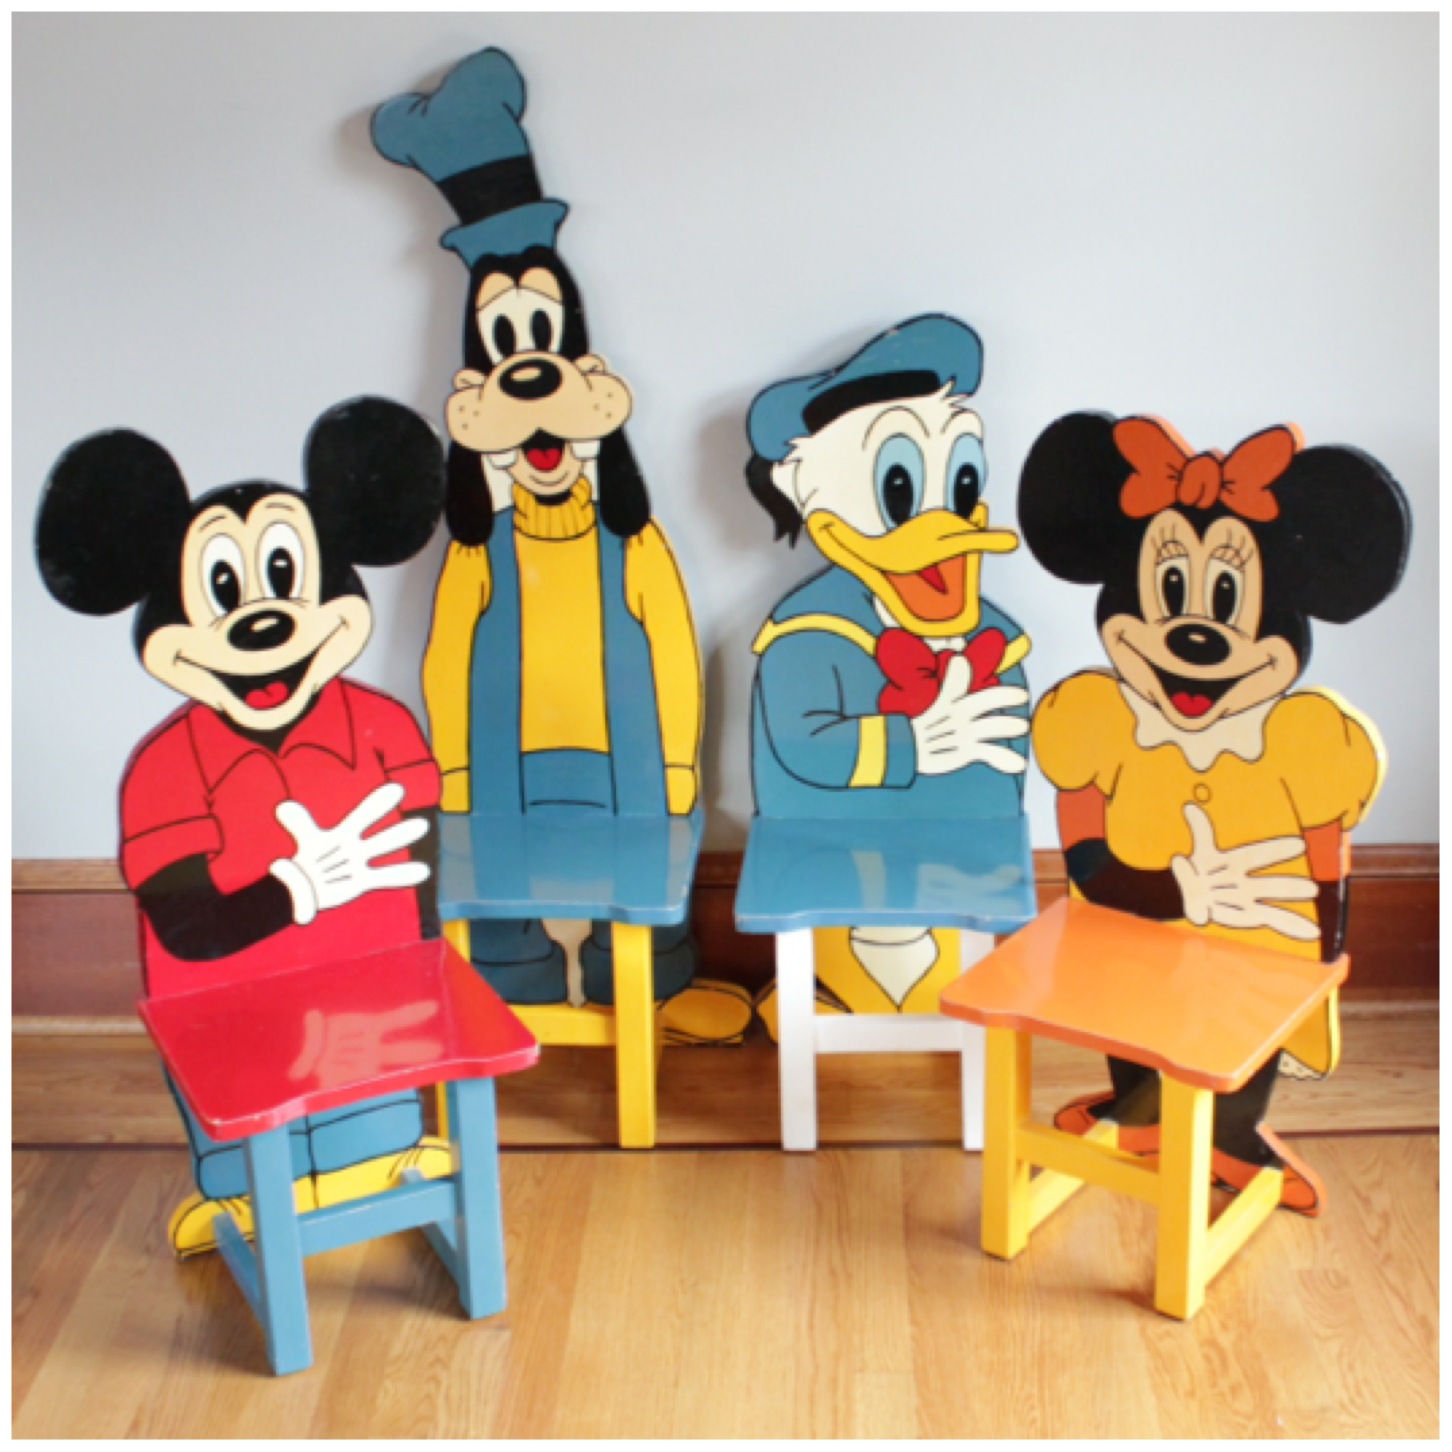 mickey mouse table and chairs set